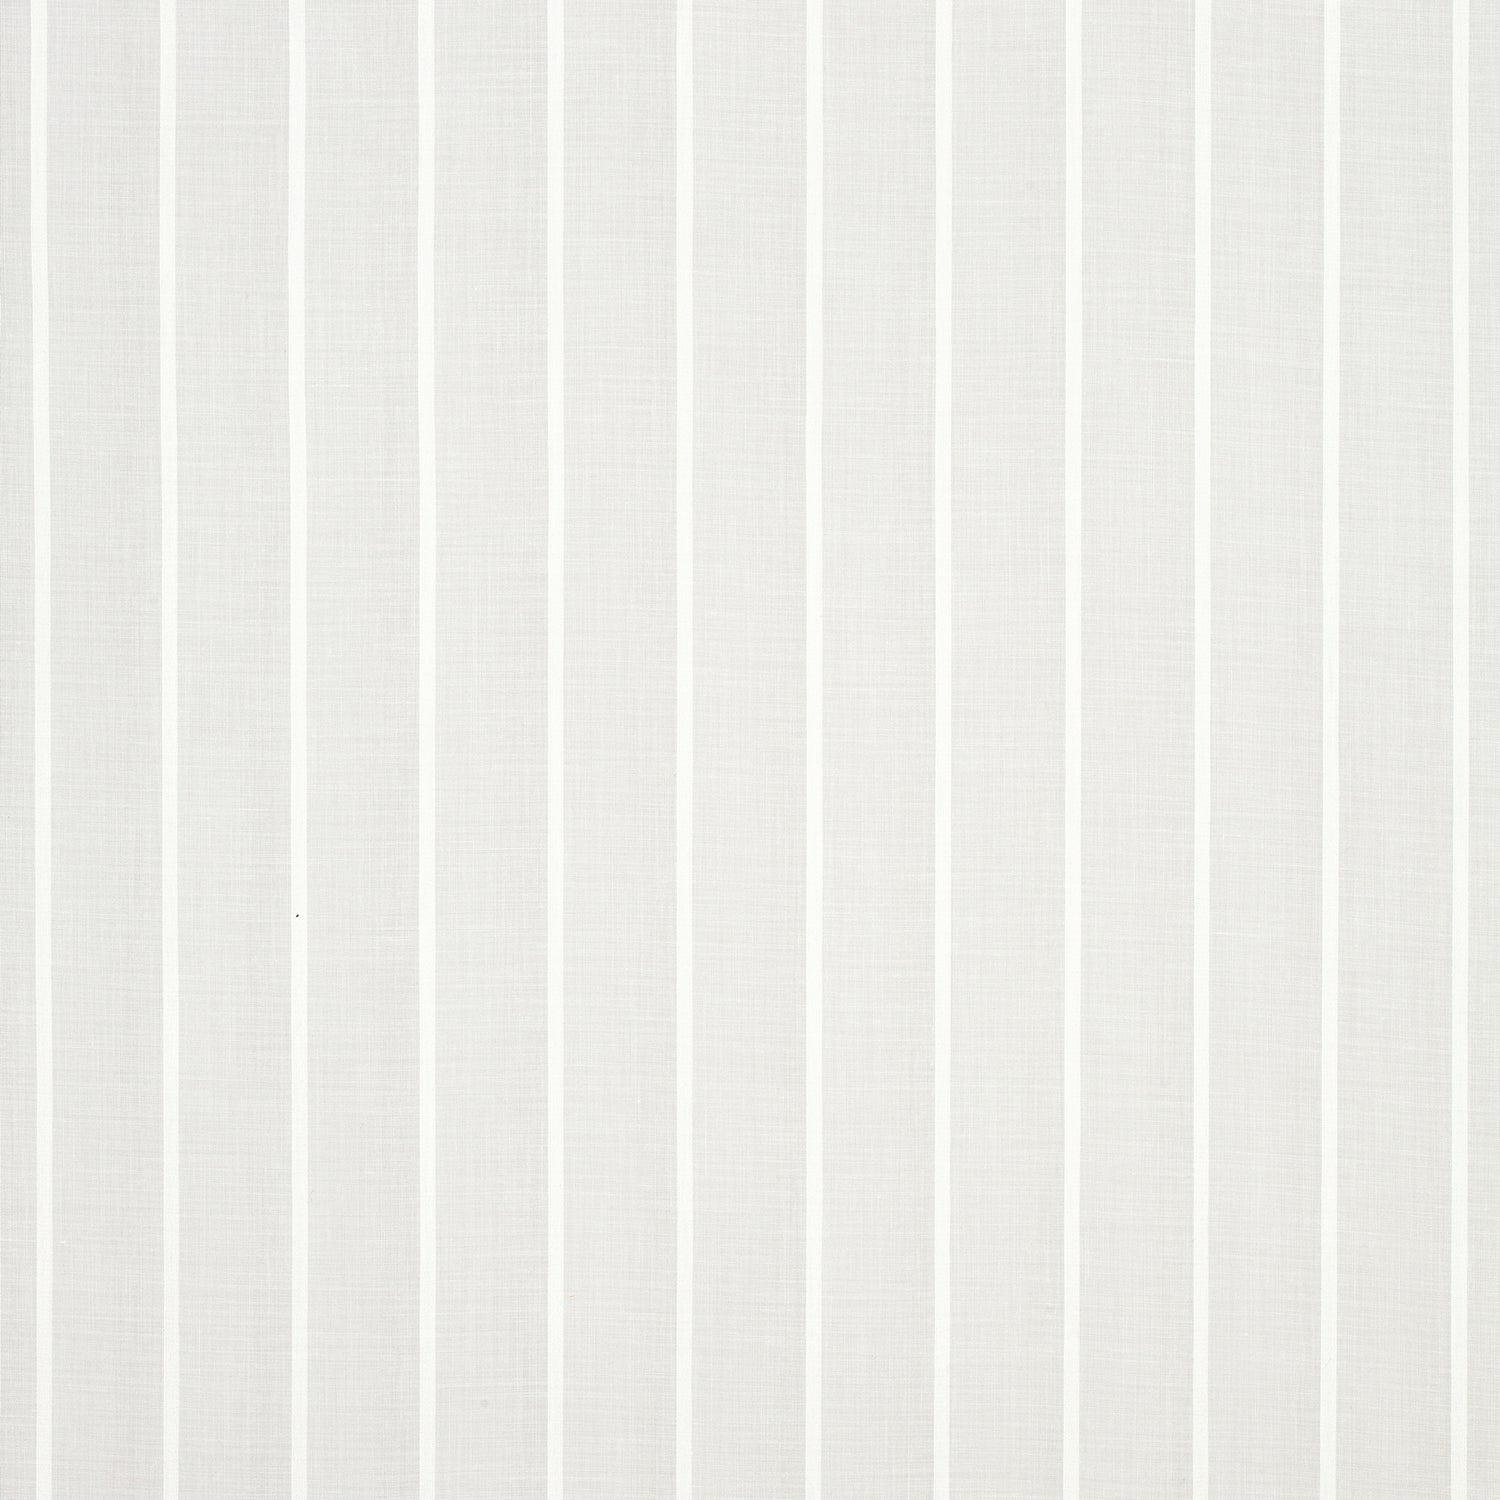 Elizabeth Stripe fabric in snow white color - pattern number FWW7151 - by Thibaut in the Atmosphere and Locale Wide Width fabric collections